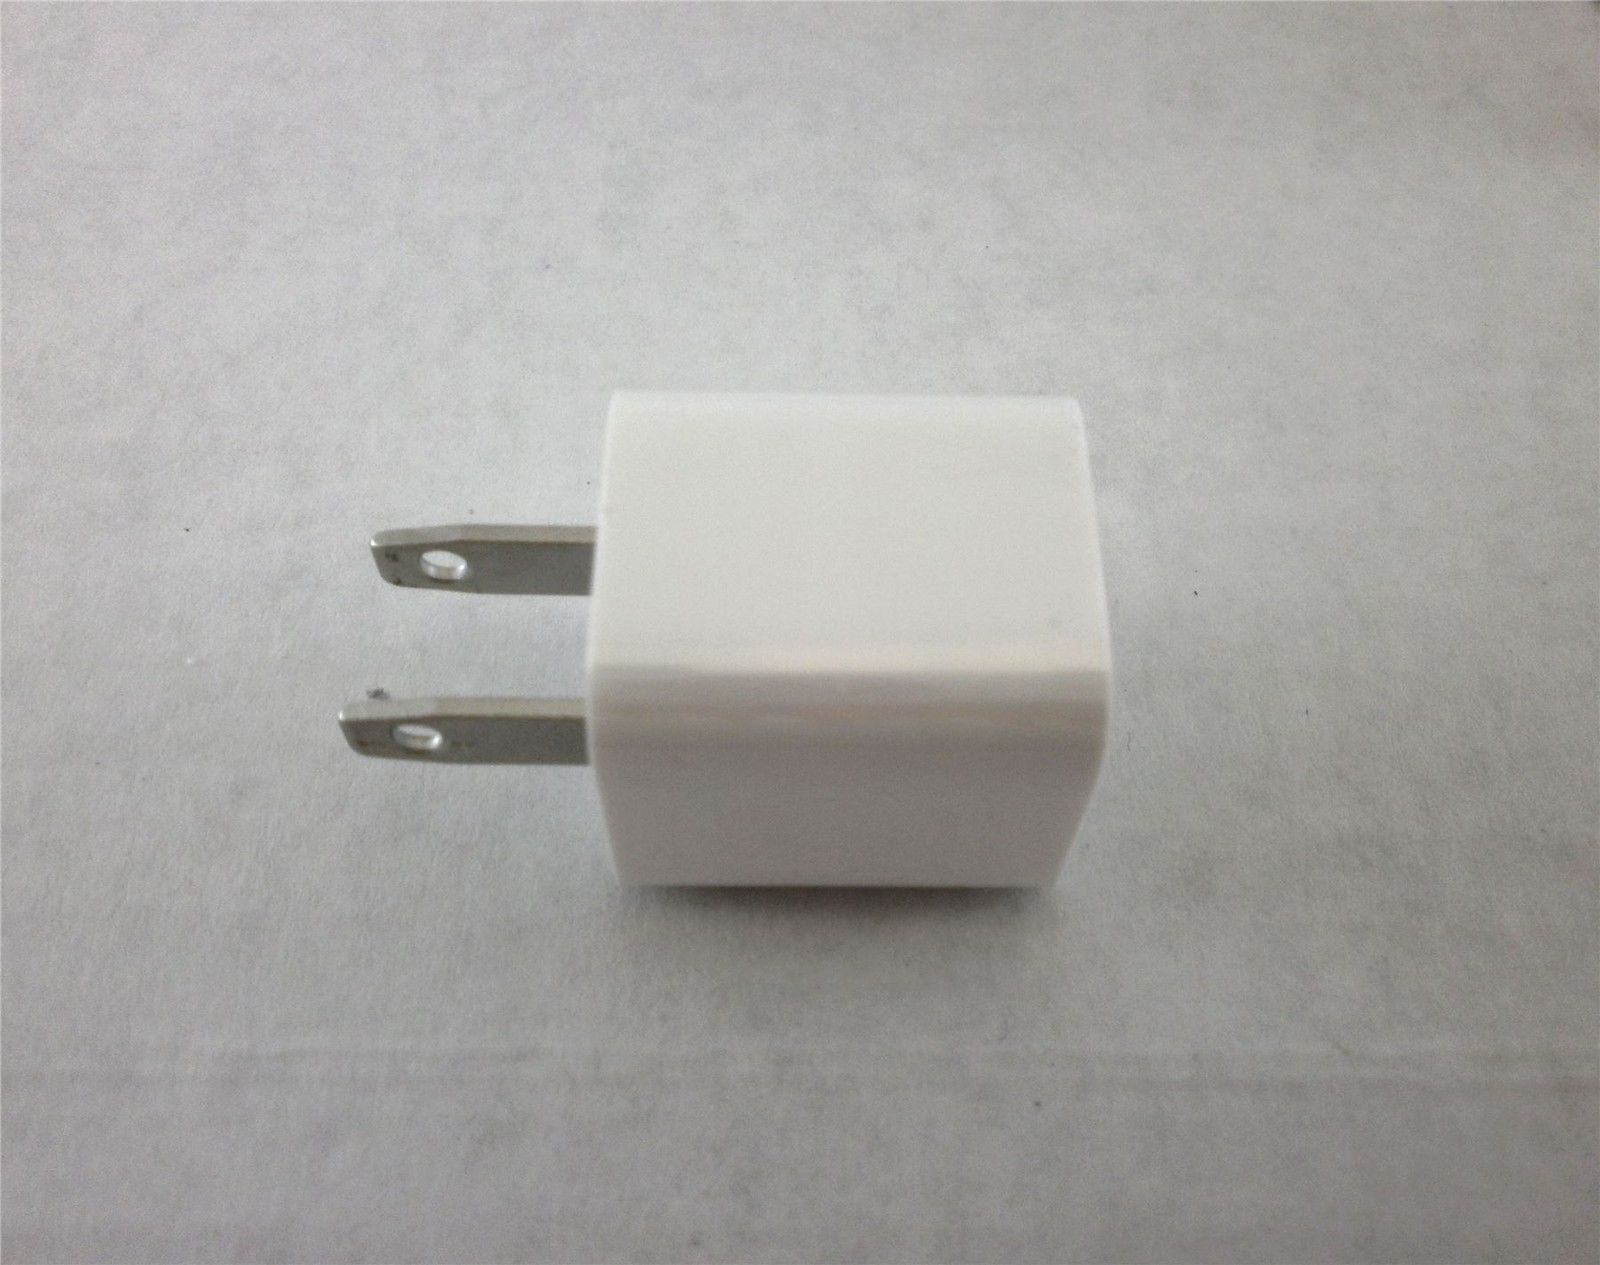 Apple 5/5C/5s AC Adapter Power Supply Cord Cable Charger